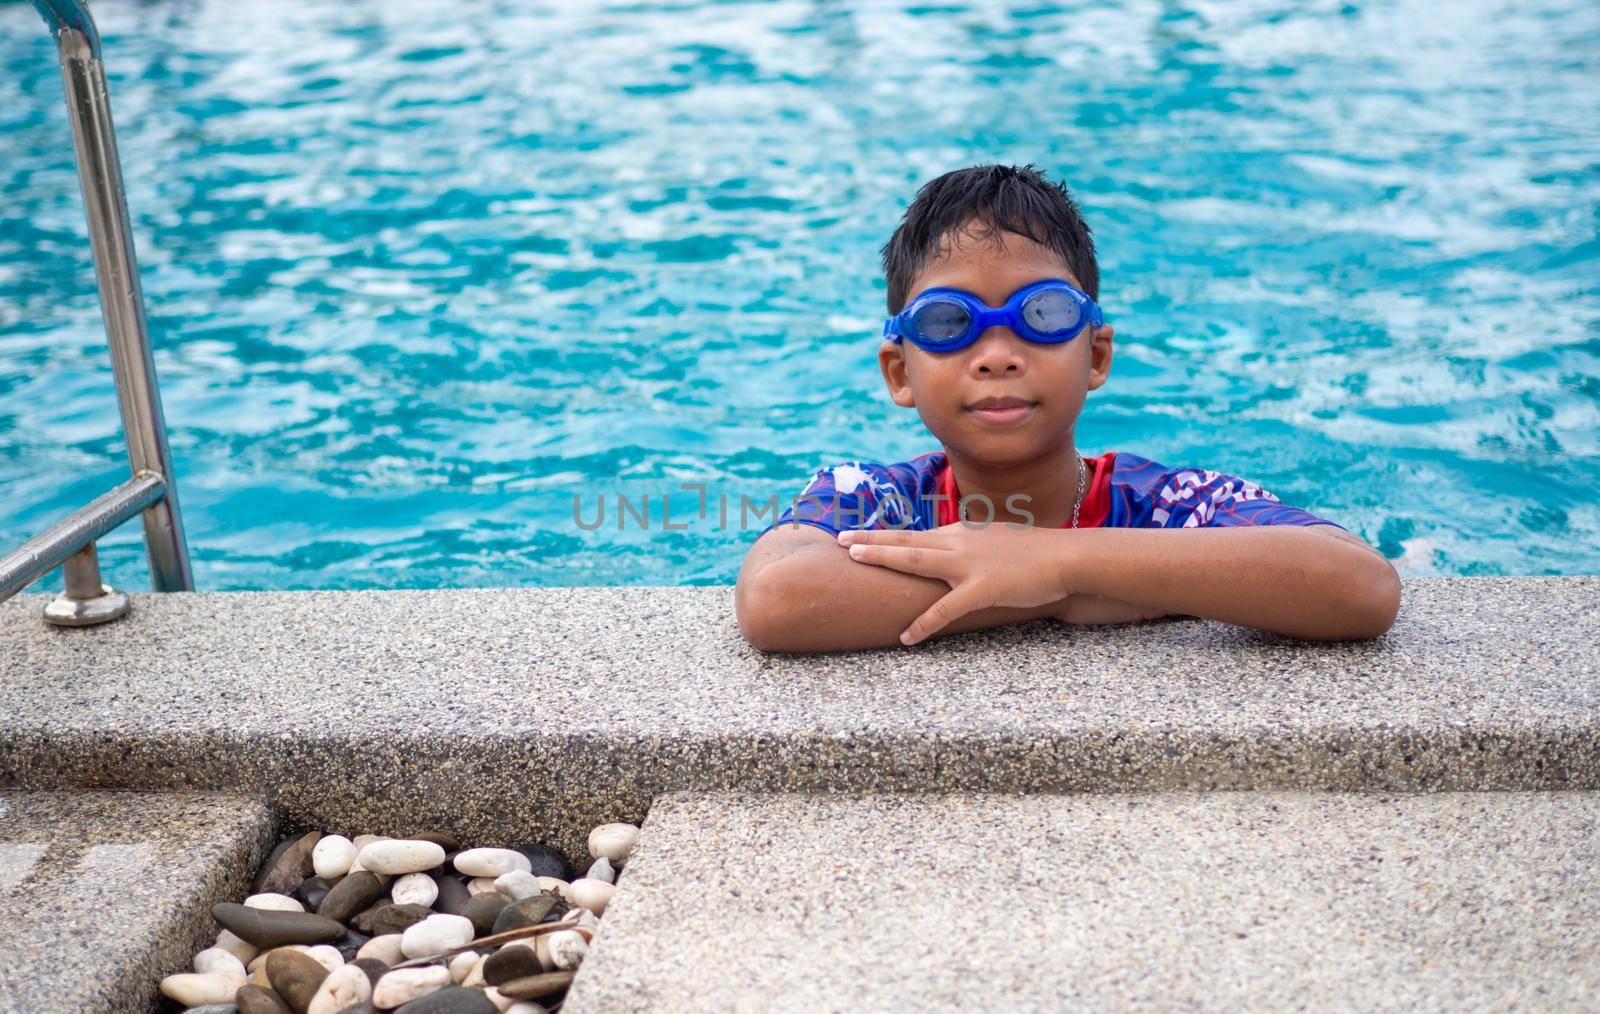 The boy wearing swimsuits and glasses Smile while perched on the edge of the swimming pool.